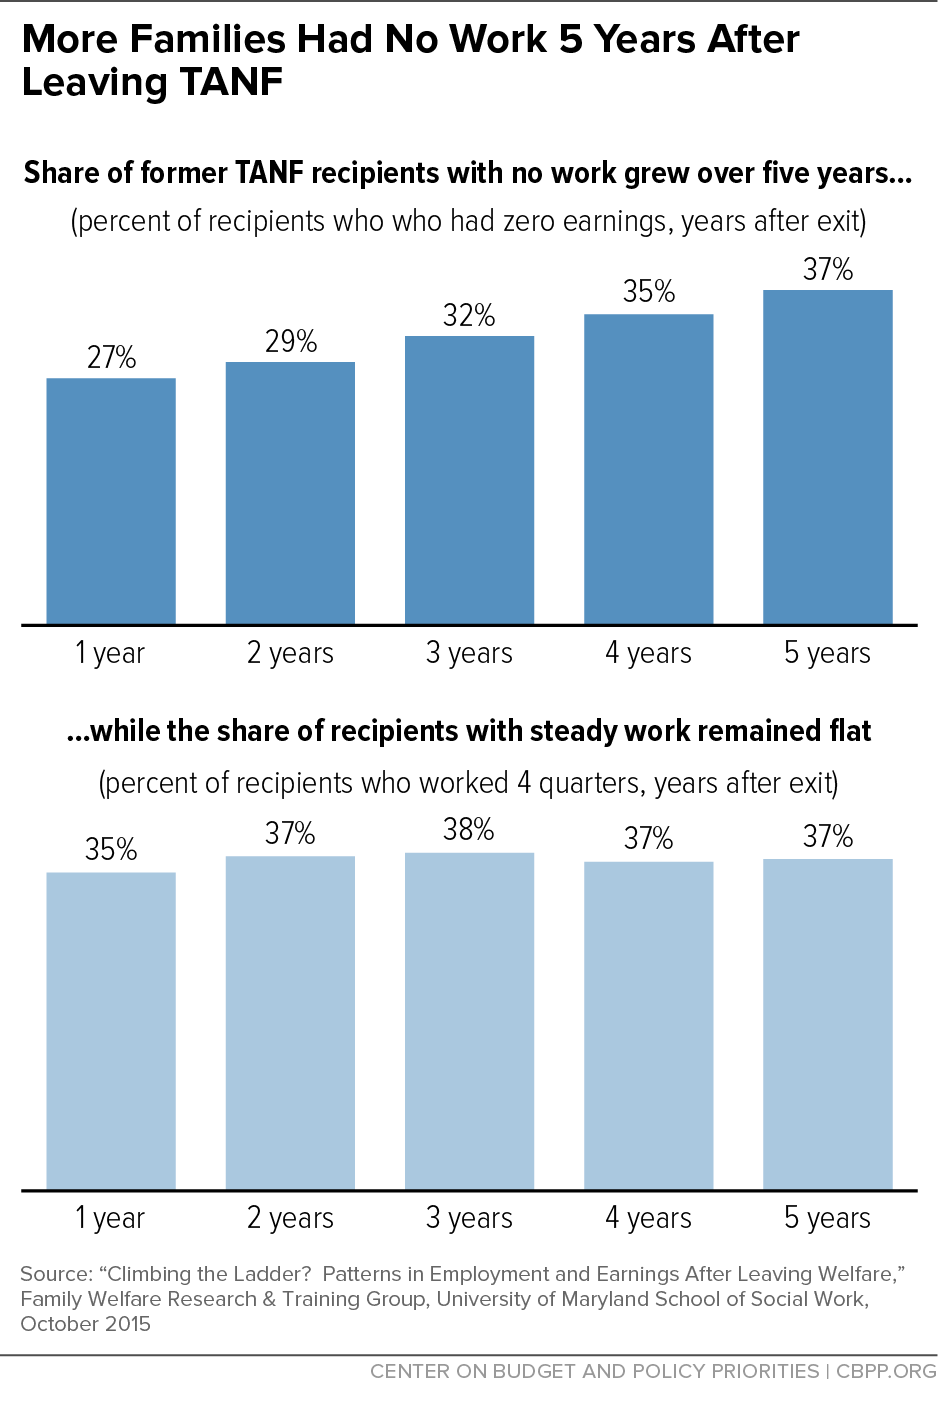 Most Families Had No Work 5 Years After Leaving TANF